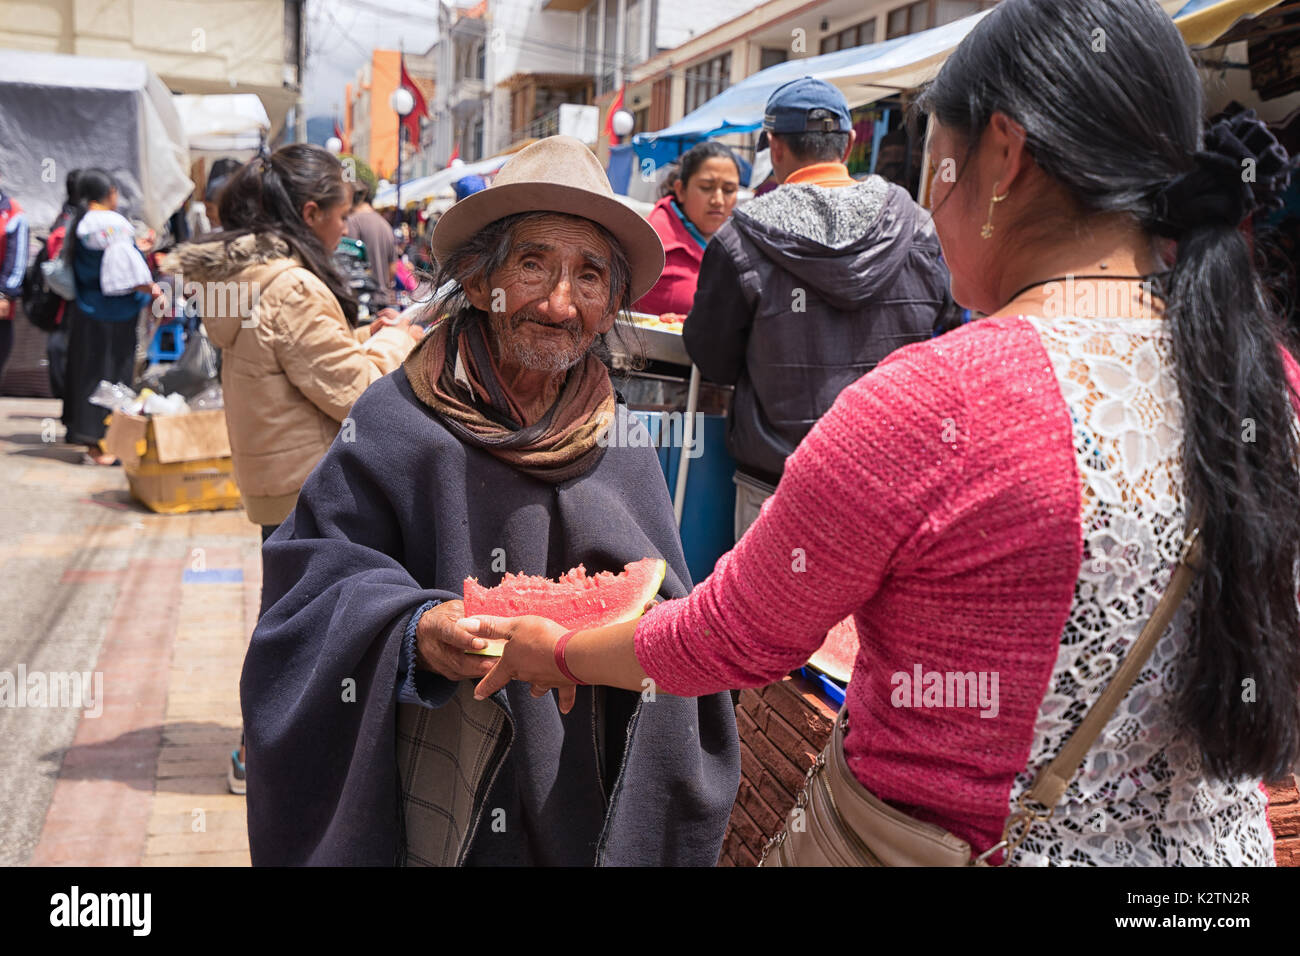 May 6, 2017 Otavalo, Ecuador: a woman hands over a slice of watermelon to a poor indigenous man Stock Photo